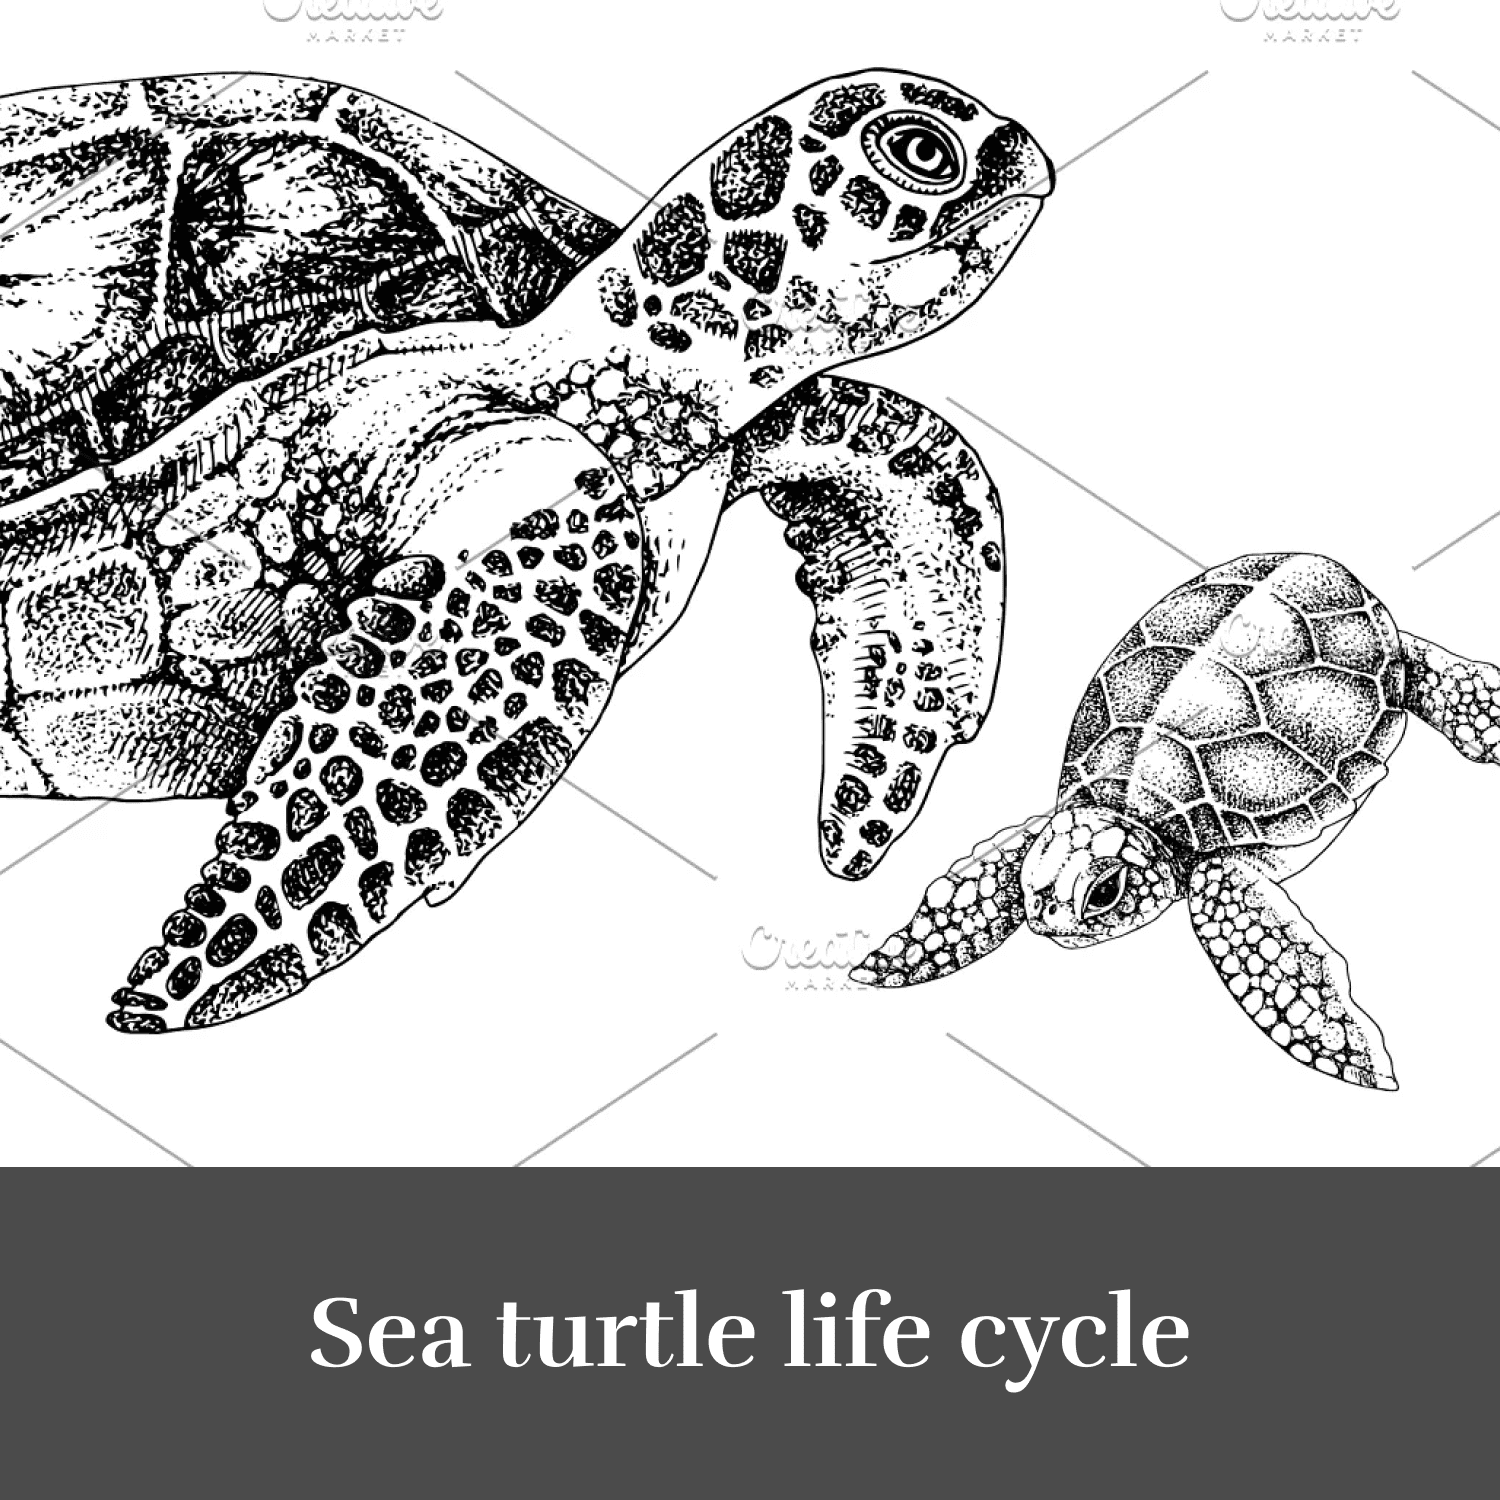 Sea turtle life cycle cover.